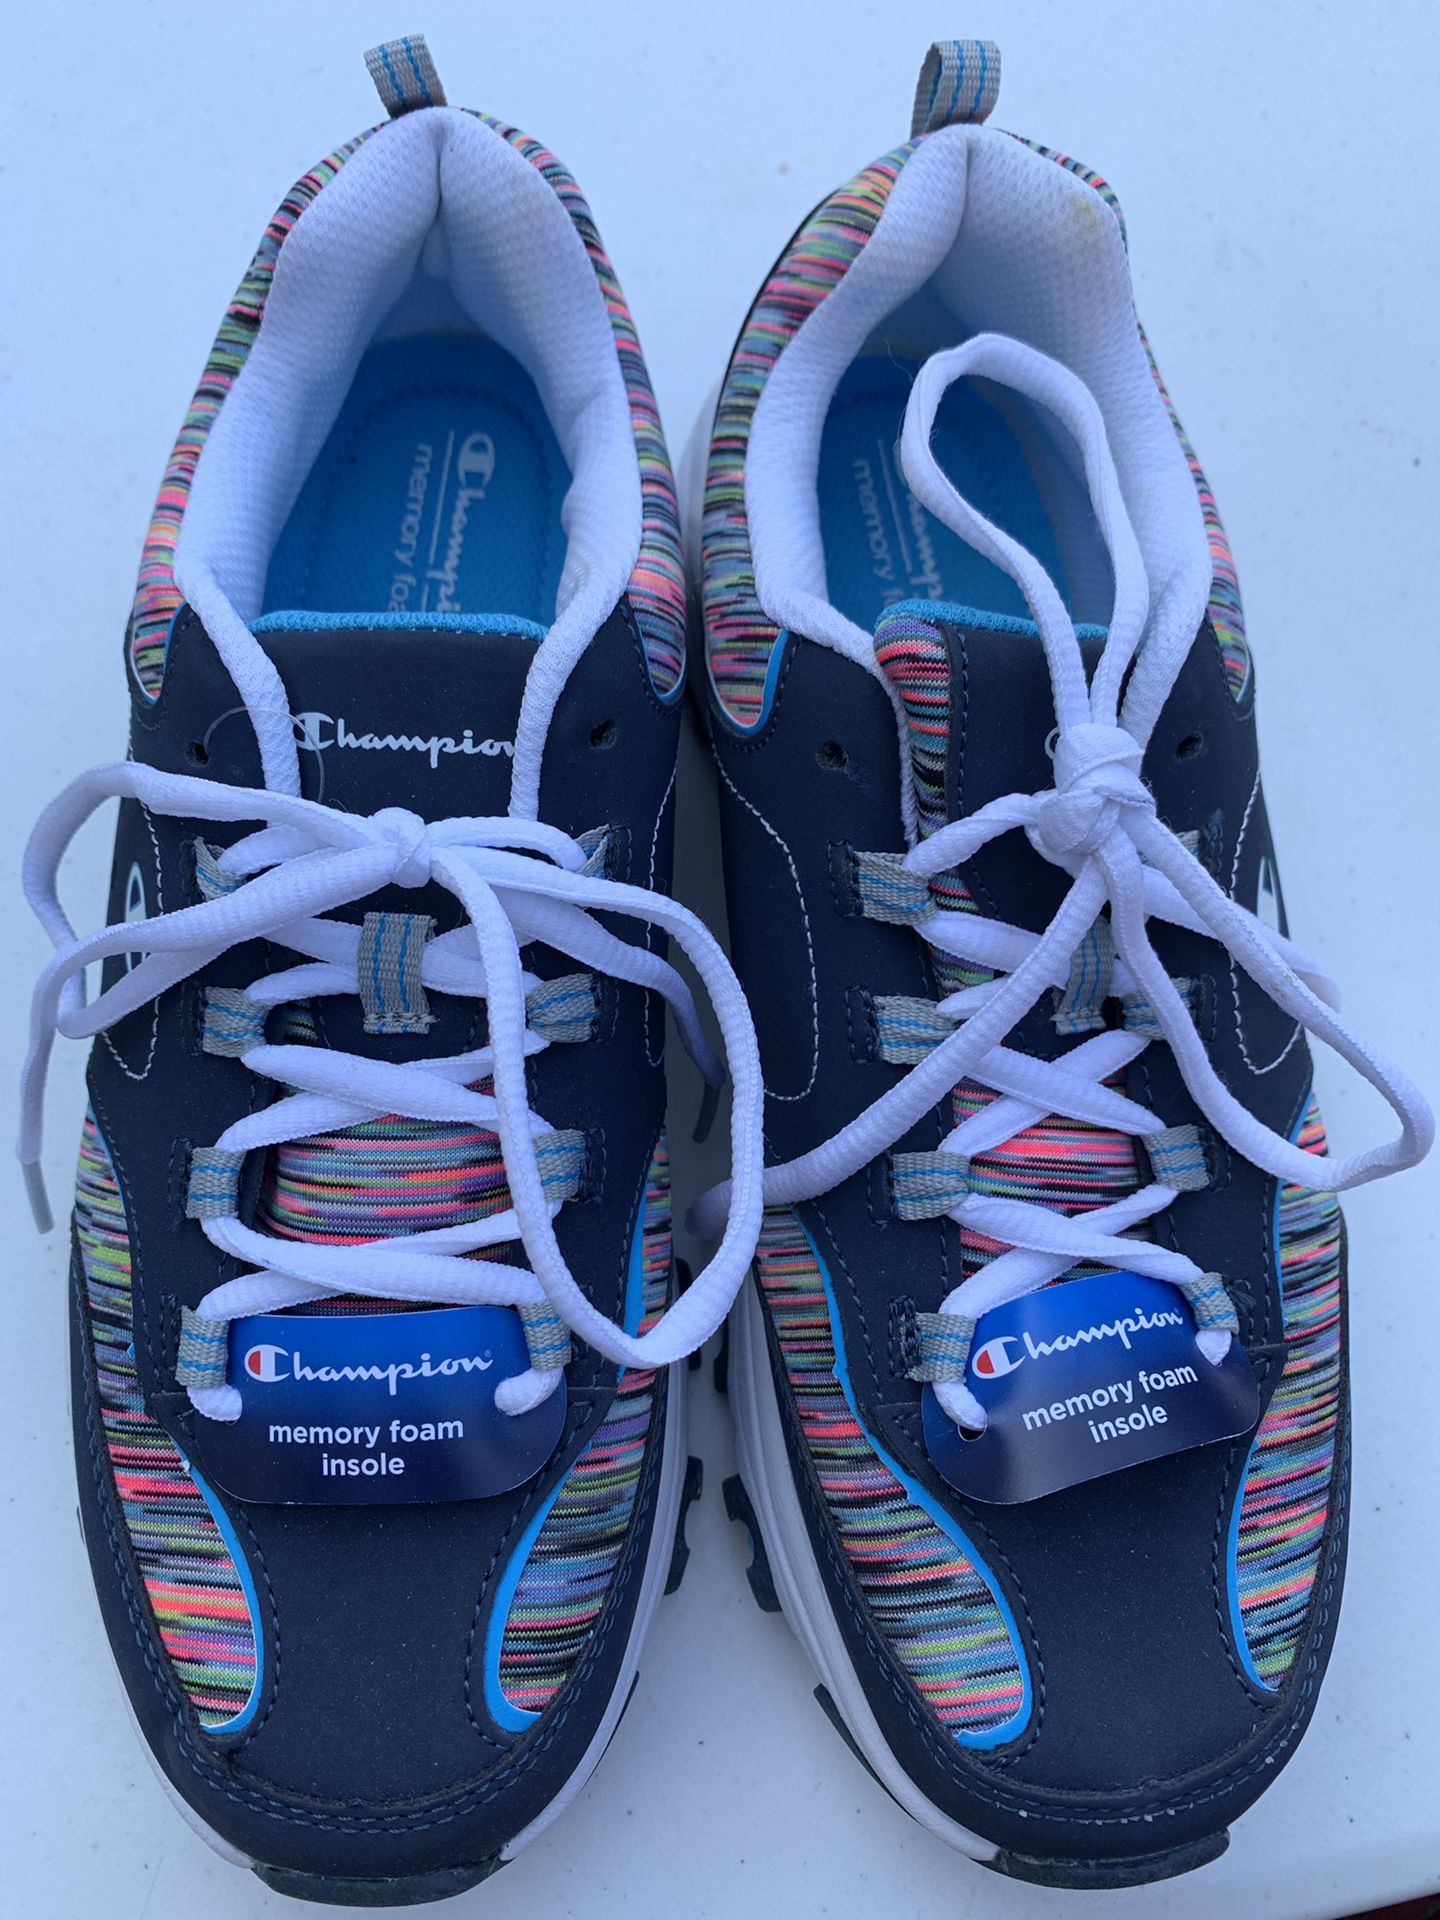 fordom makeup Kanin Champion Memory Foam Insole tennis shoes for Sale in Chula Vista, CA -  OfferUp